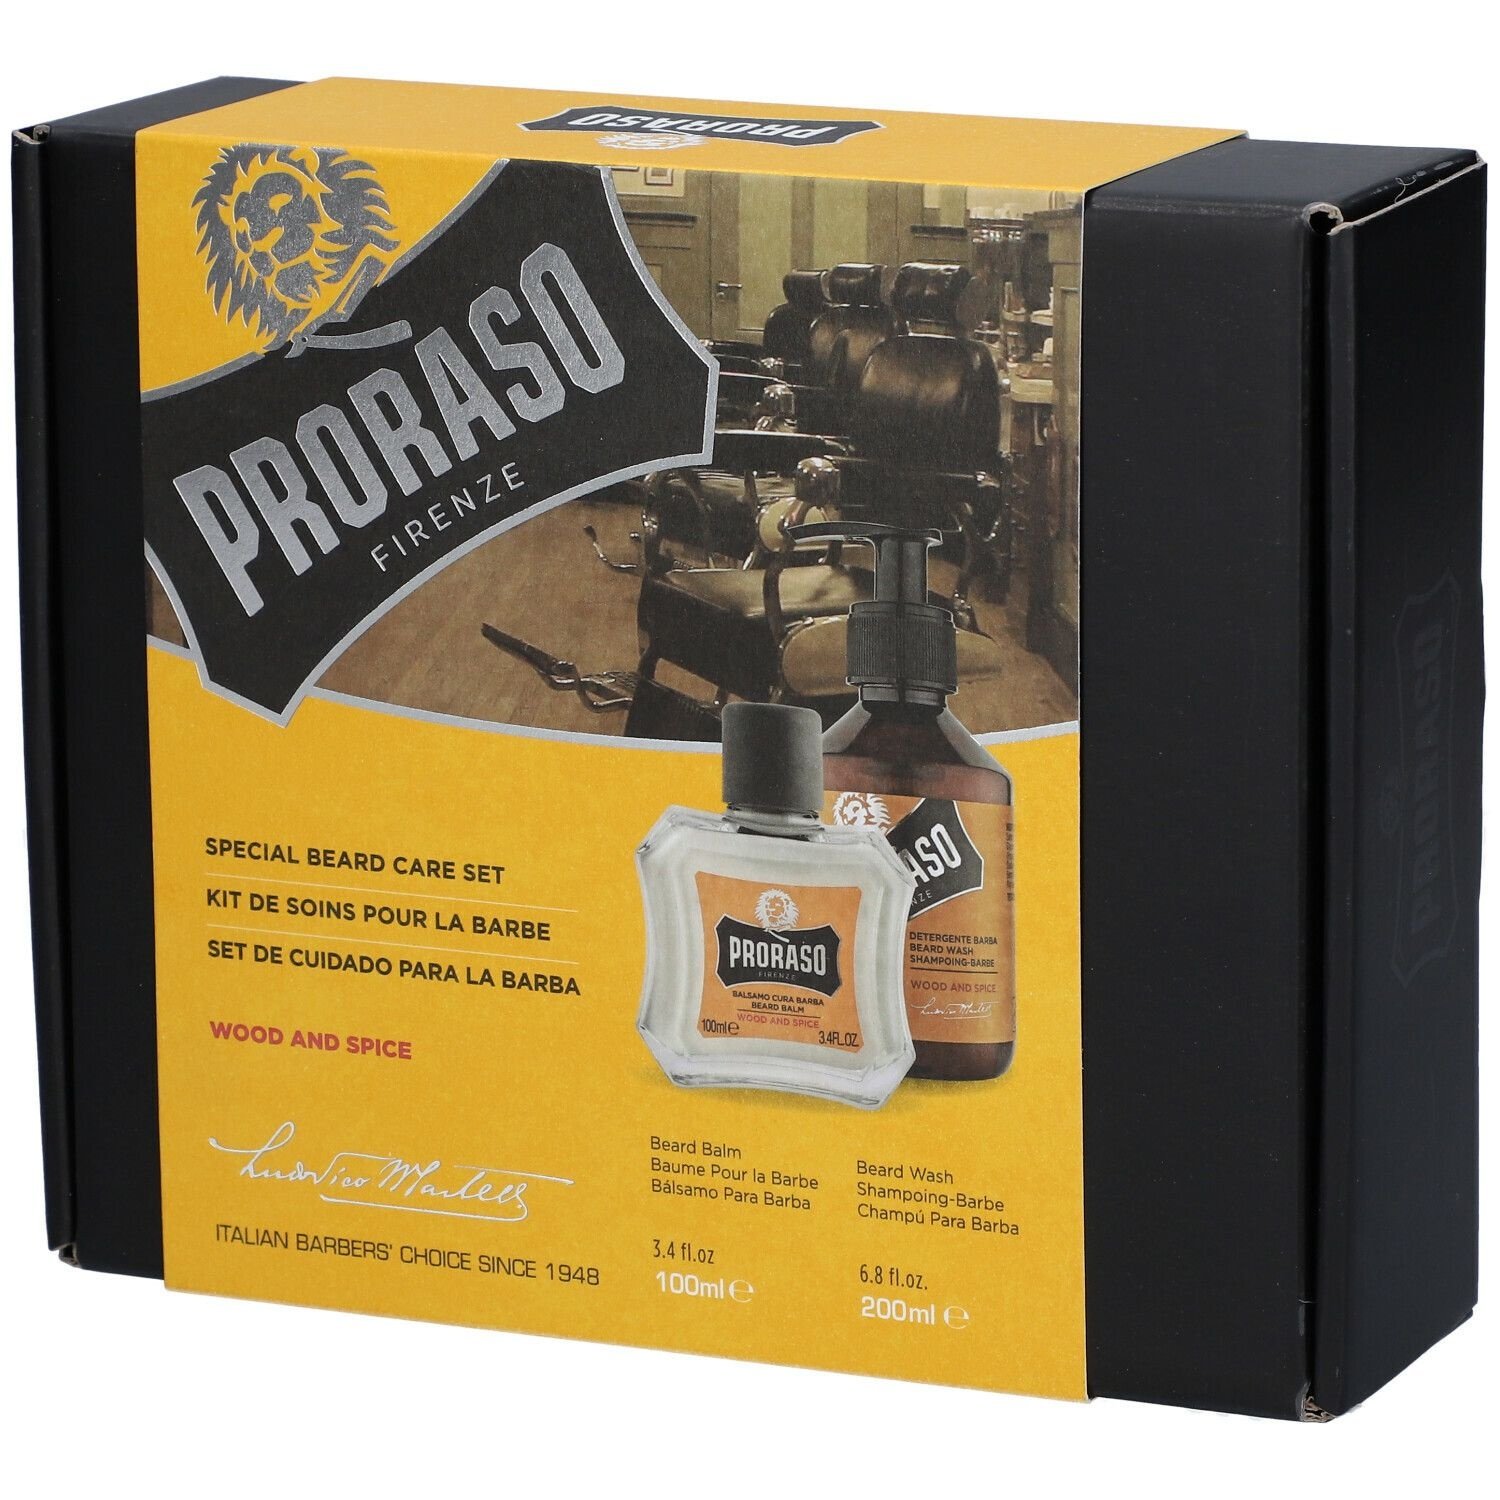 Proraso Wood and Spice Special Beard Care Set 1 set 1 pc(s) emballage(s) combi